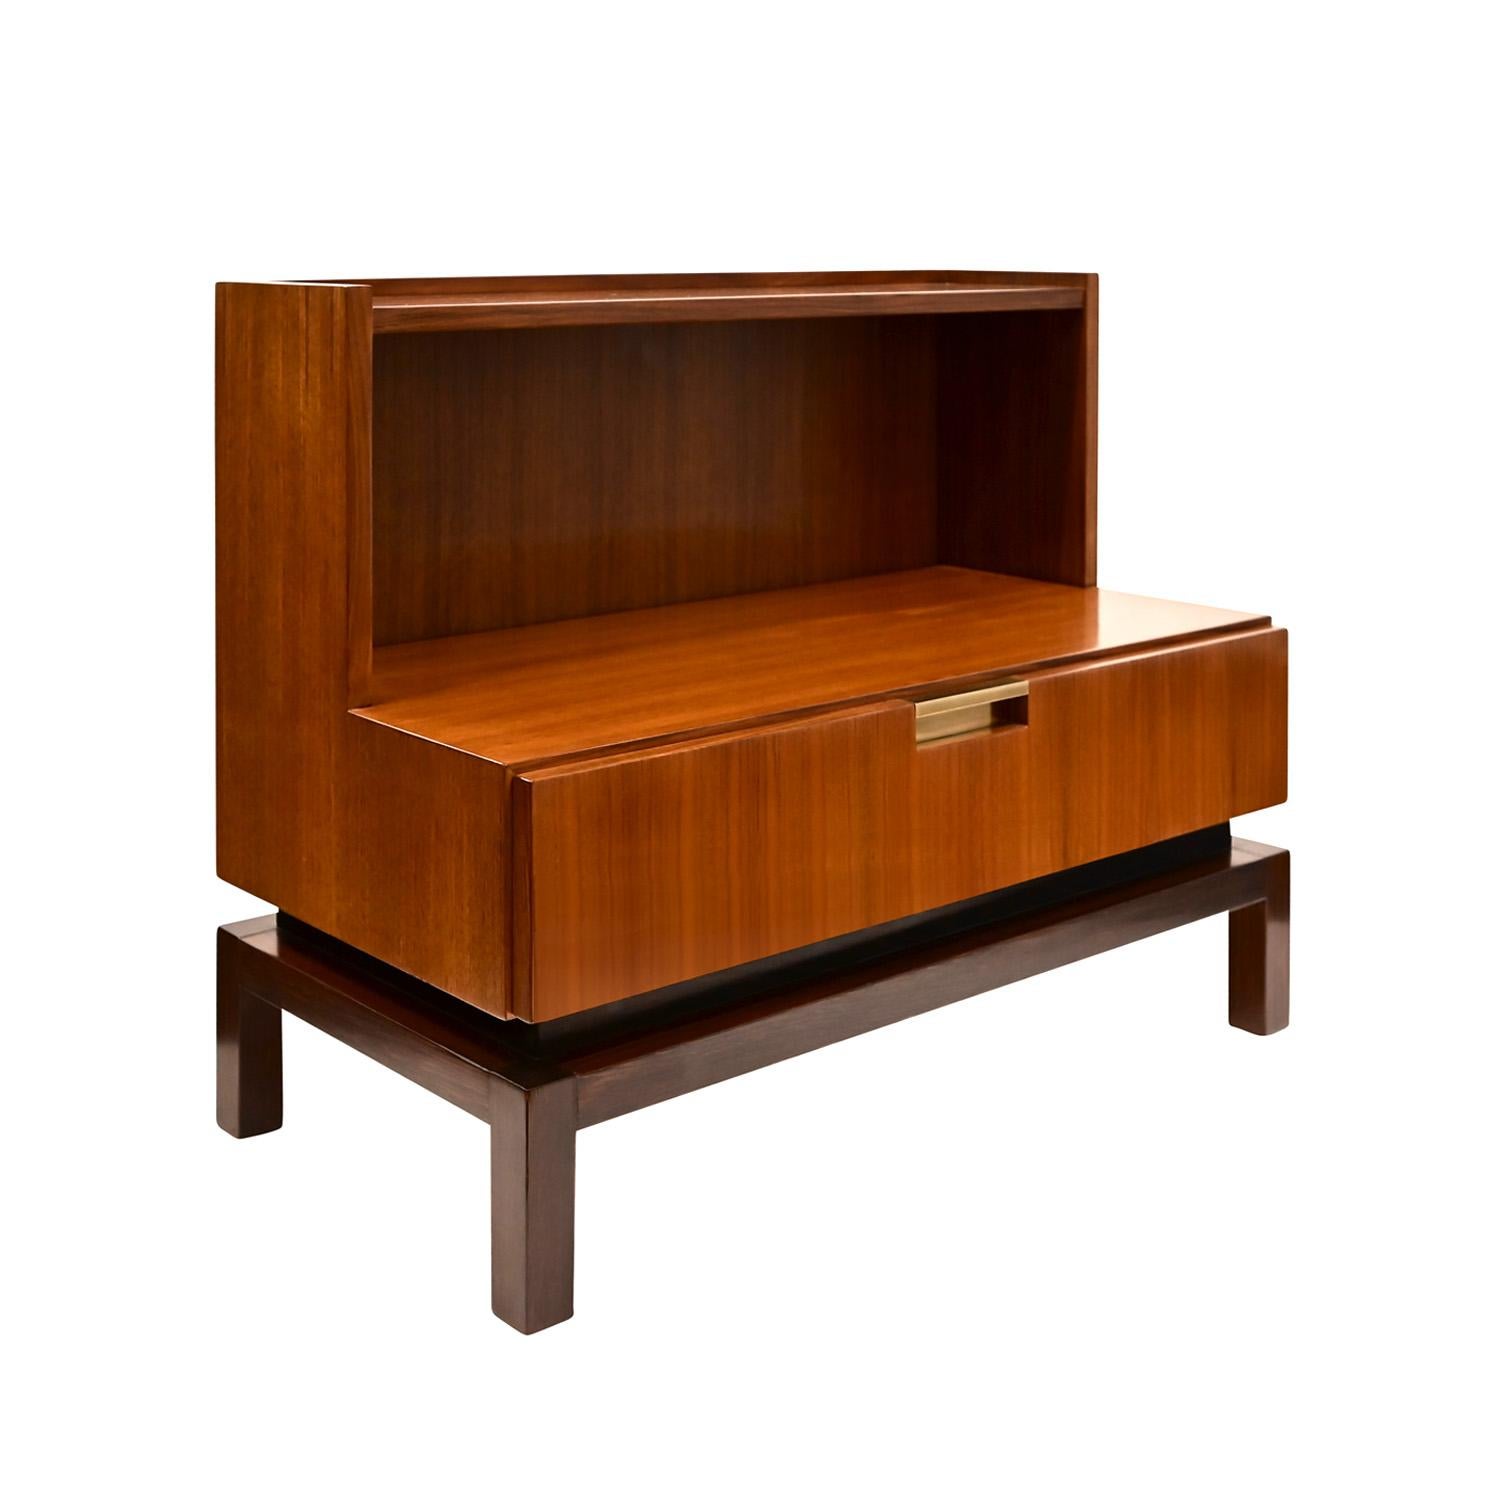 Mid-Century Modern De Coene Freres Pair of Beautifully Tailored Bedside Tables 1960s For Sale